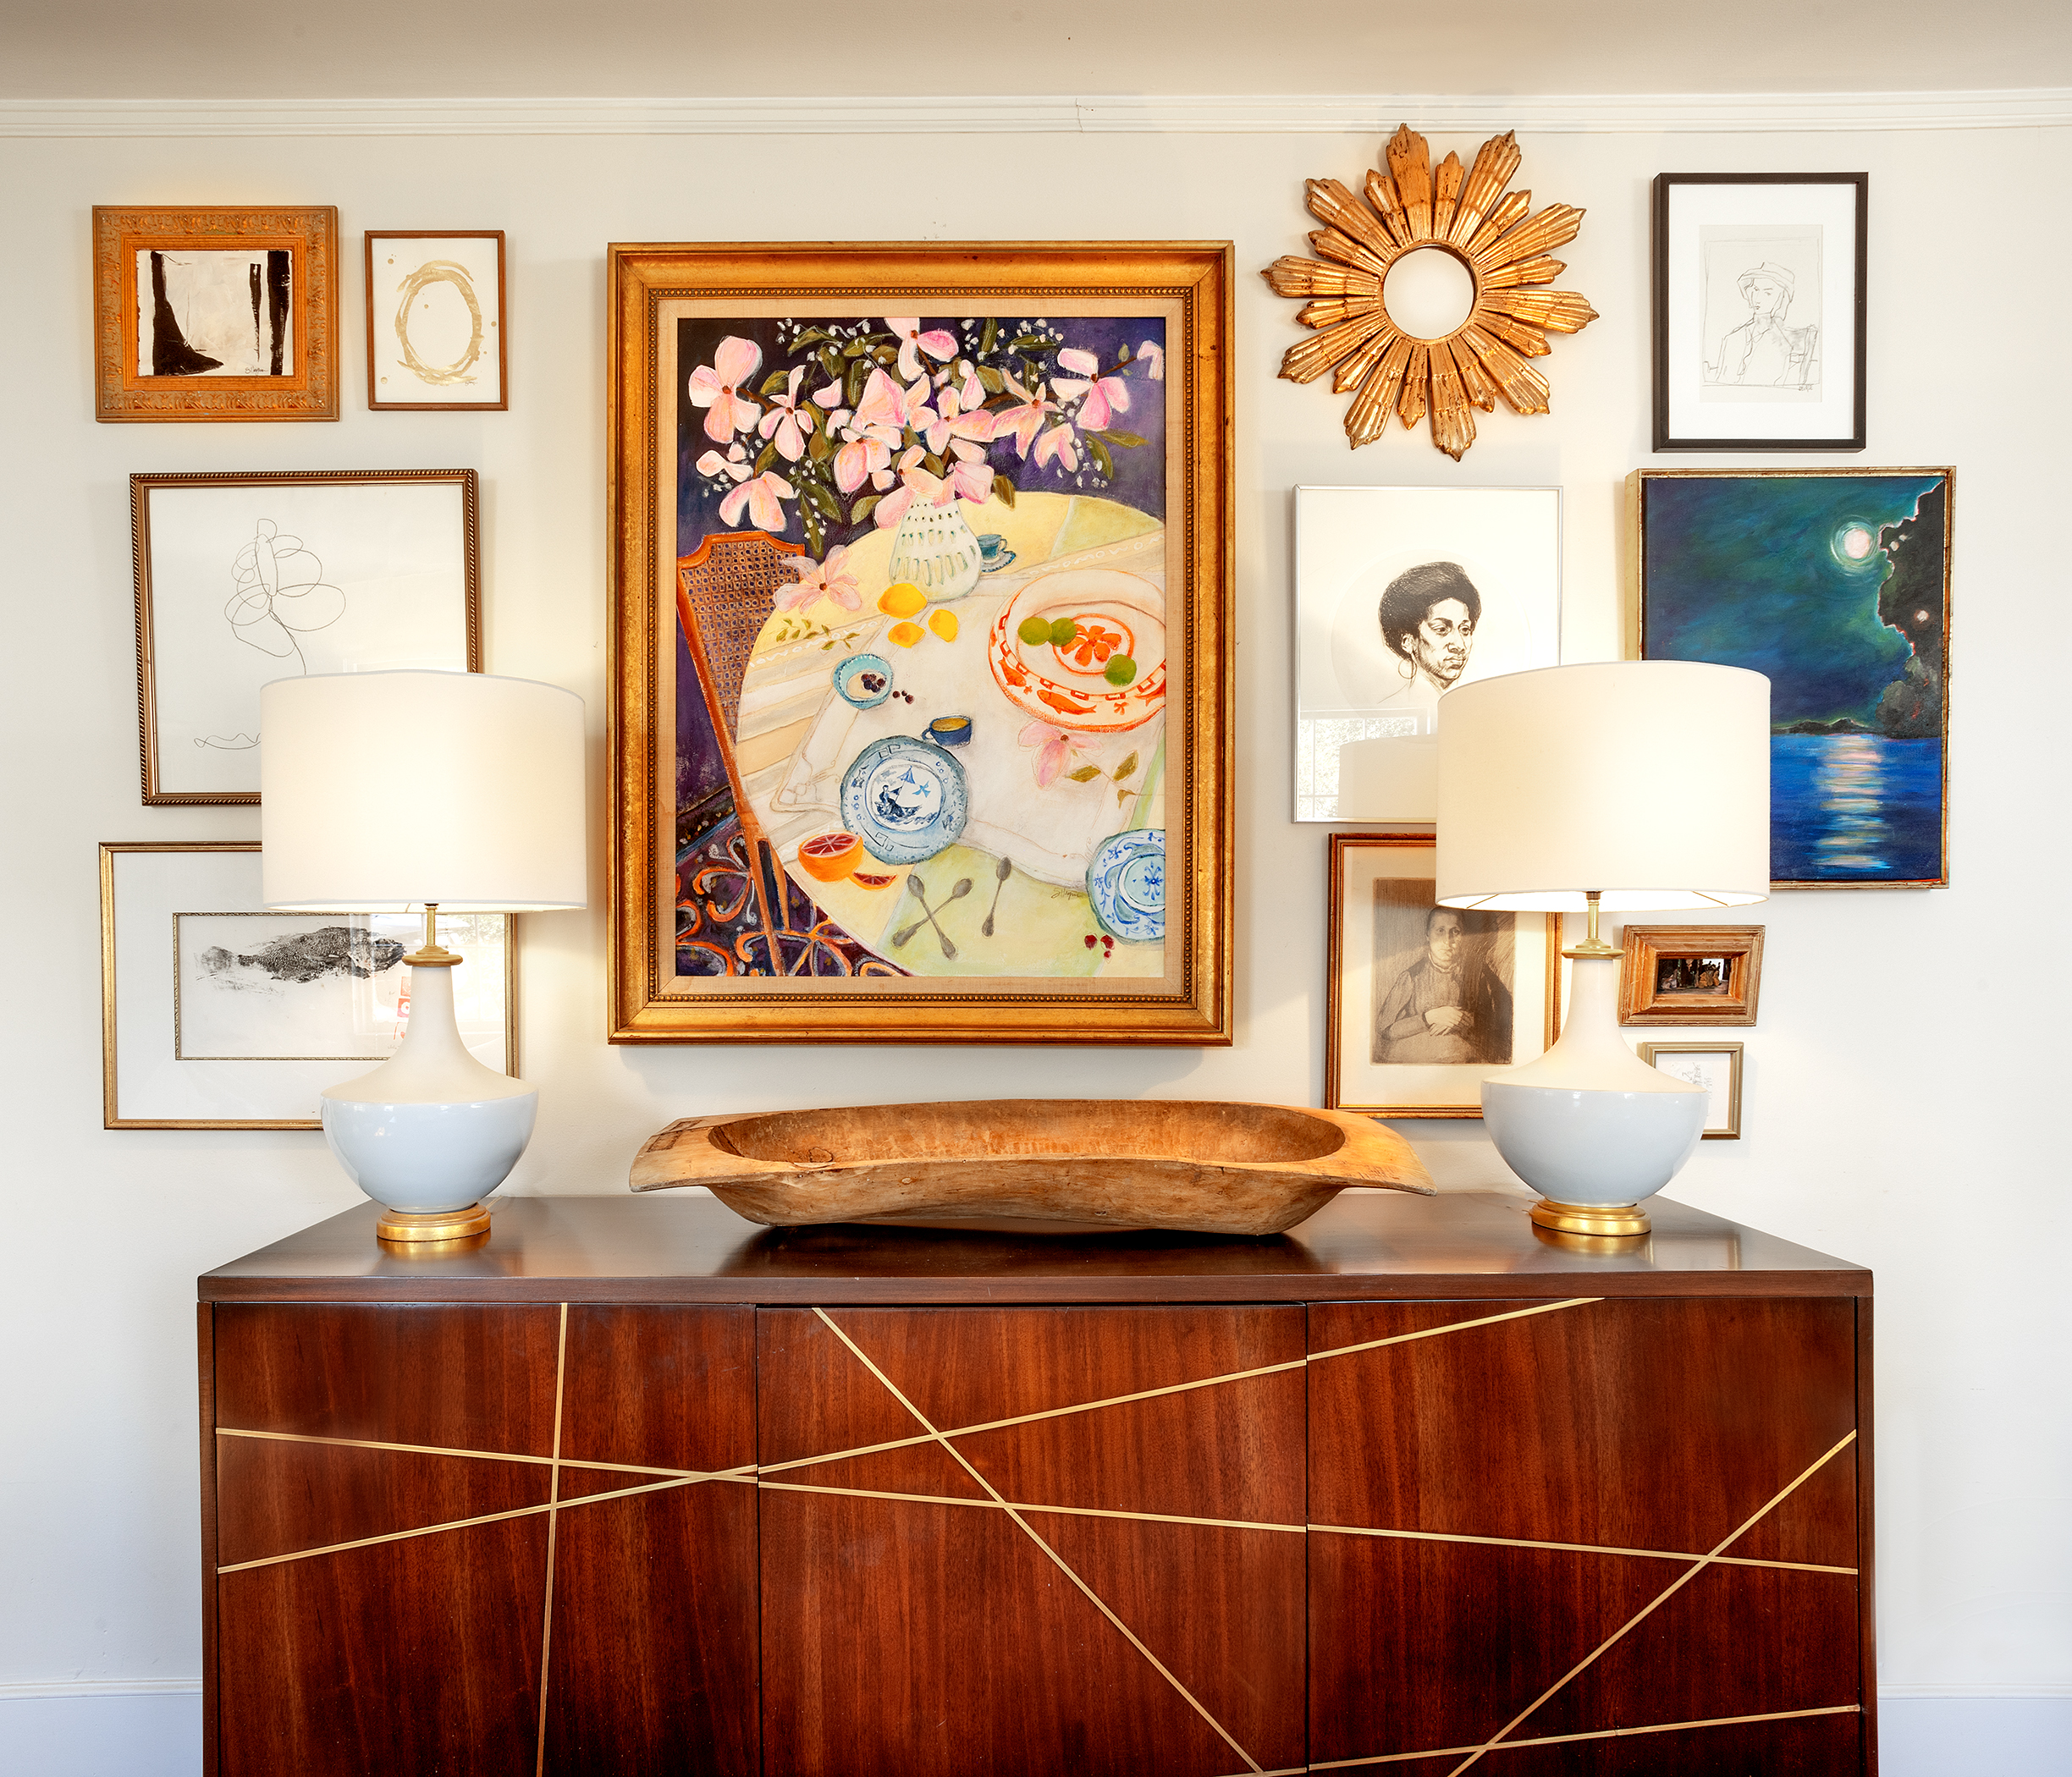 Shawn likes a mixture of realism with the abstract, along with a combination of the old and new. Her art, along with the work of many of her favorite artists, arranged above the art deco sideboard gives the room a rare eclectic ambiance.